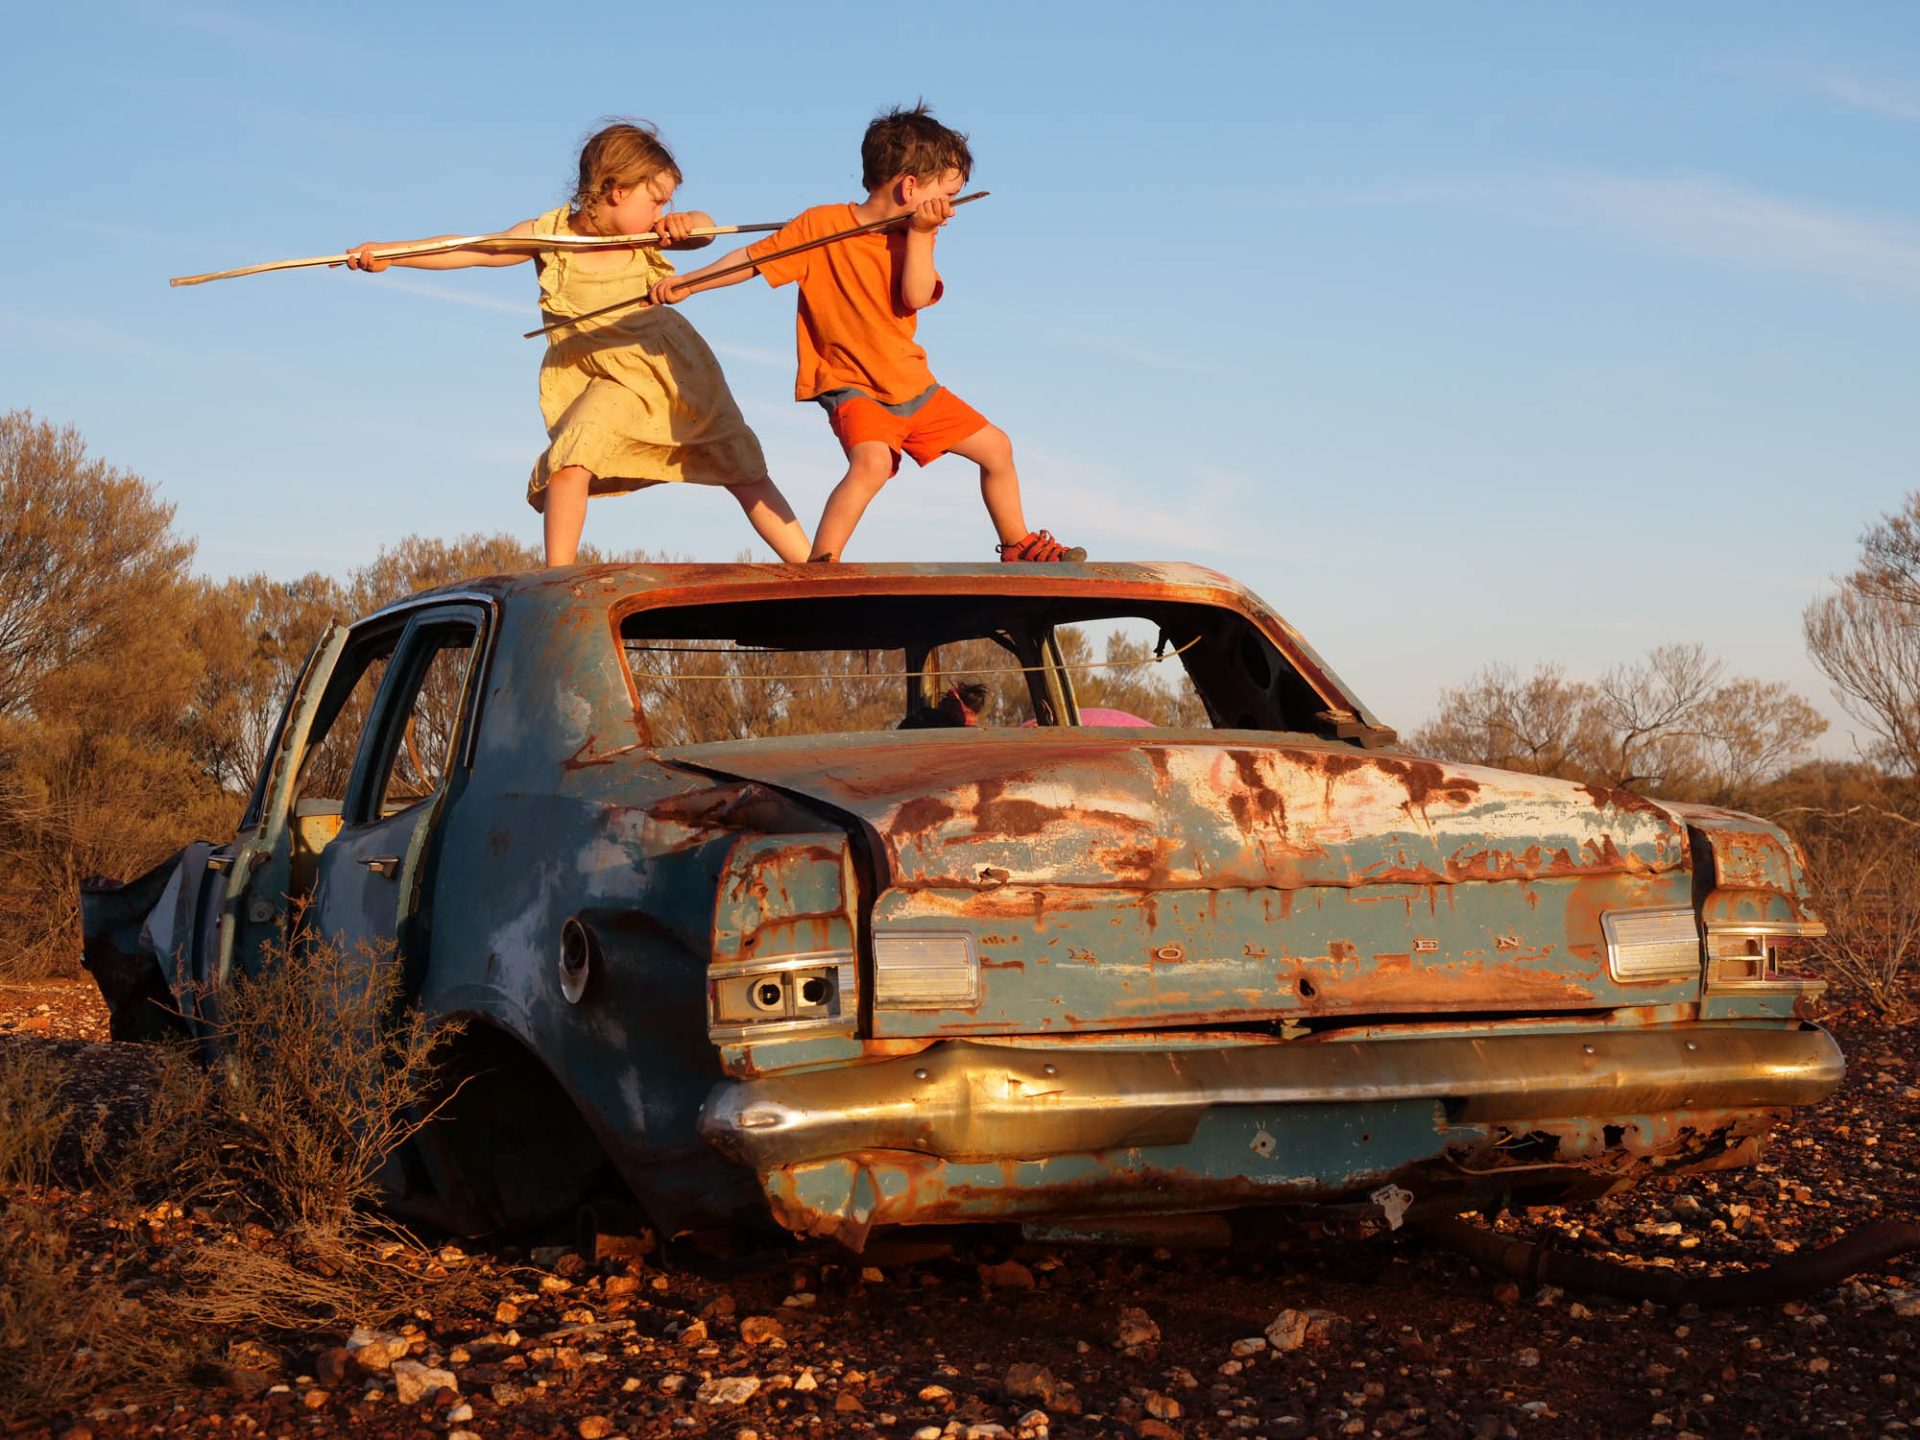 Hope and Wilfy, wielding sticks, stand in a ninja-like pose on the roof of an abandoned rusted out old car. 